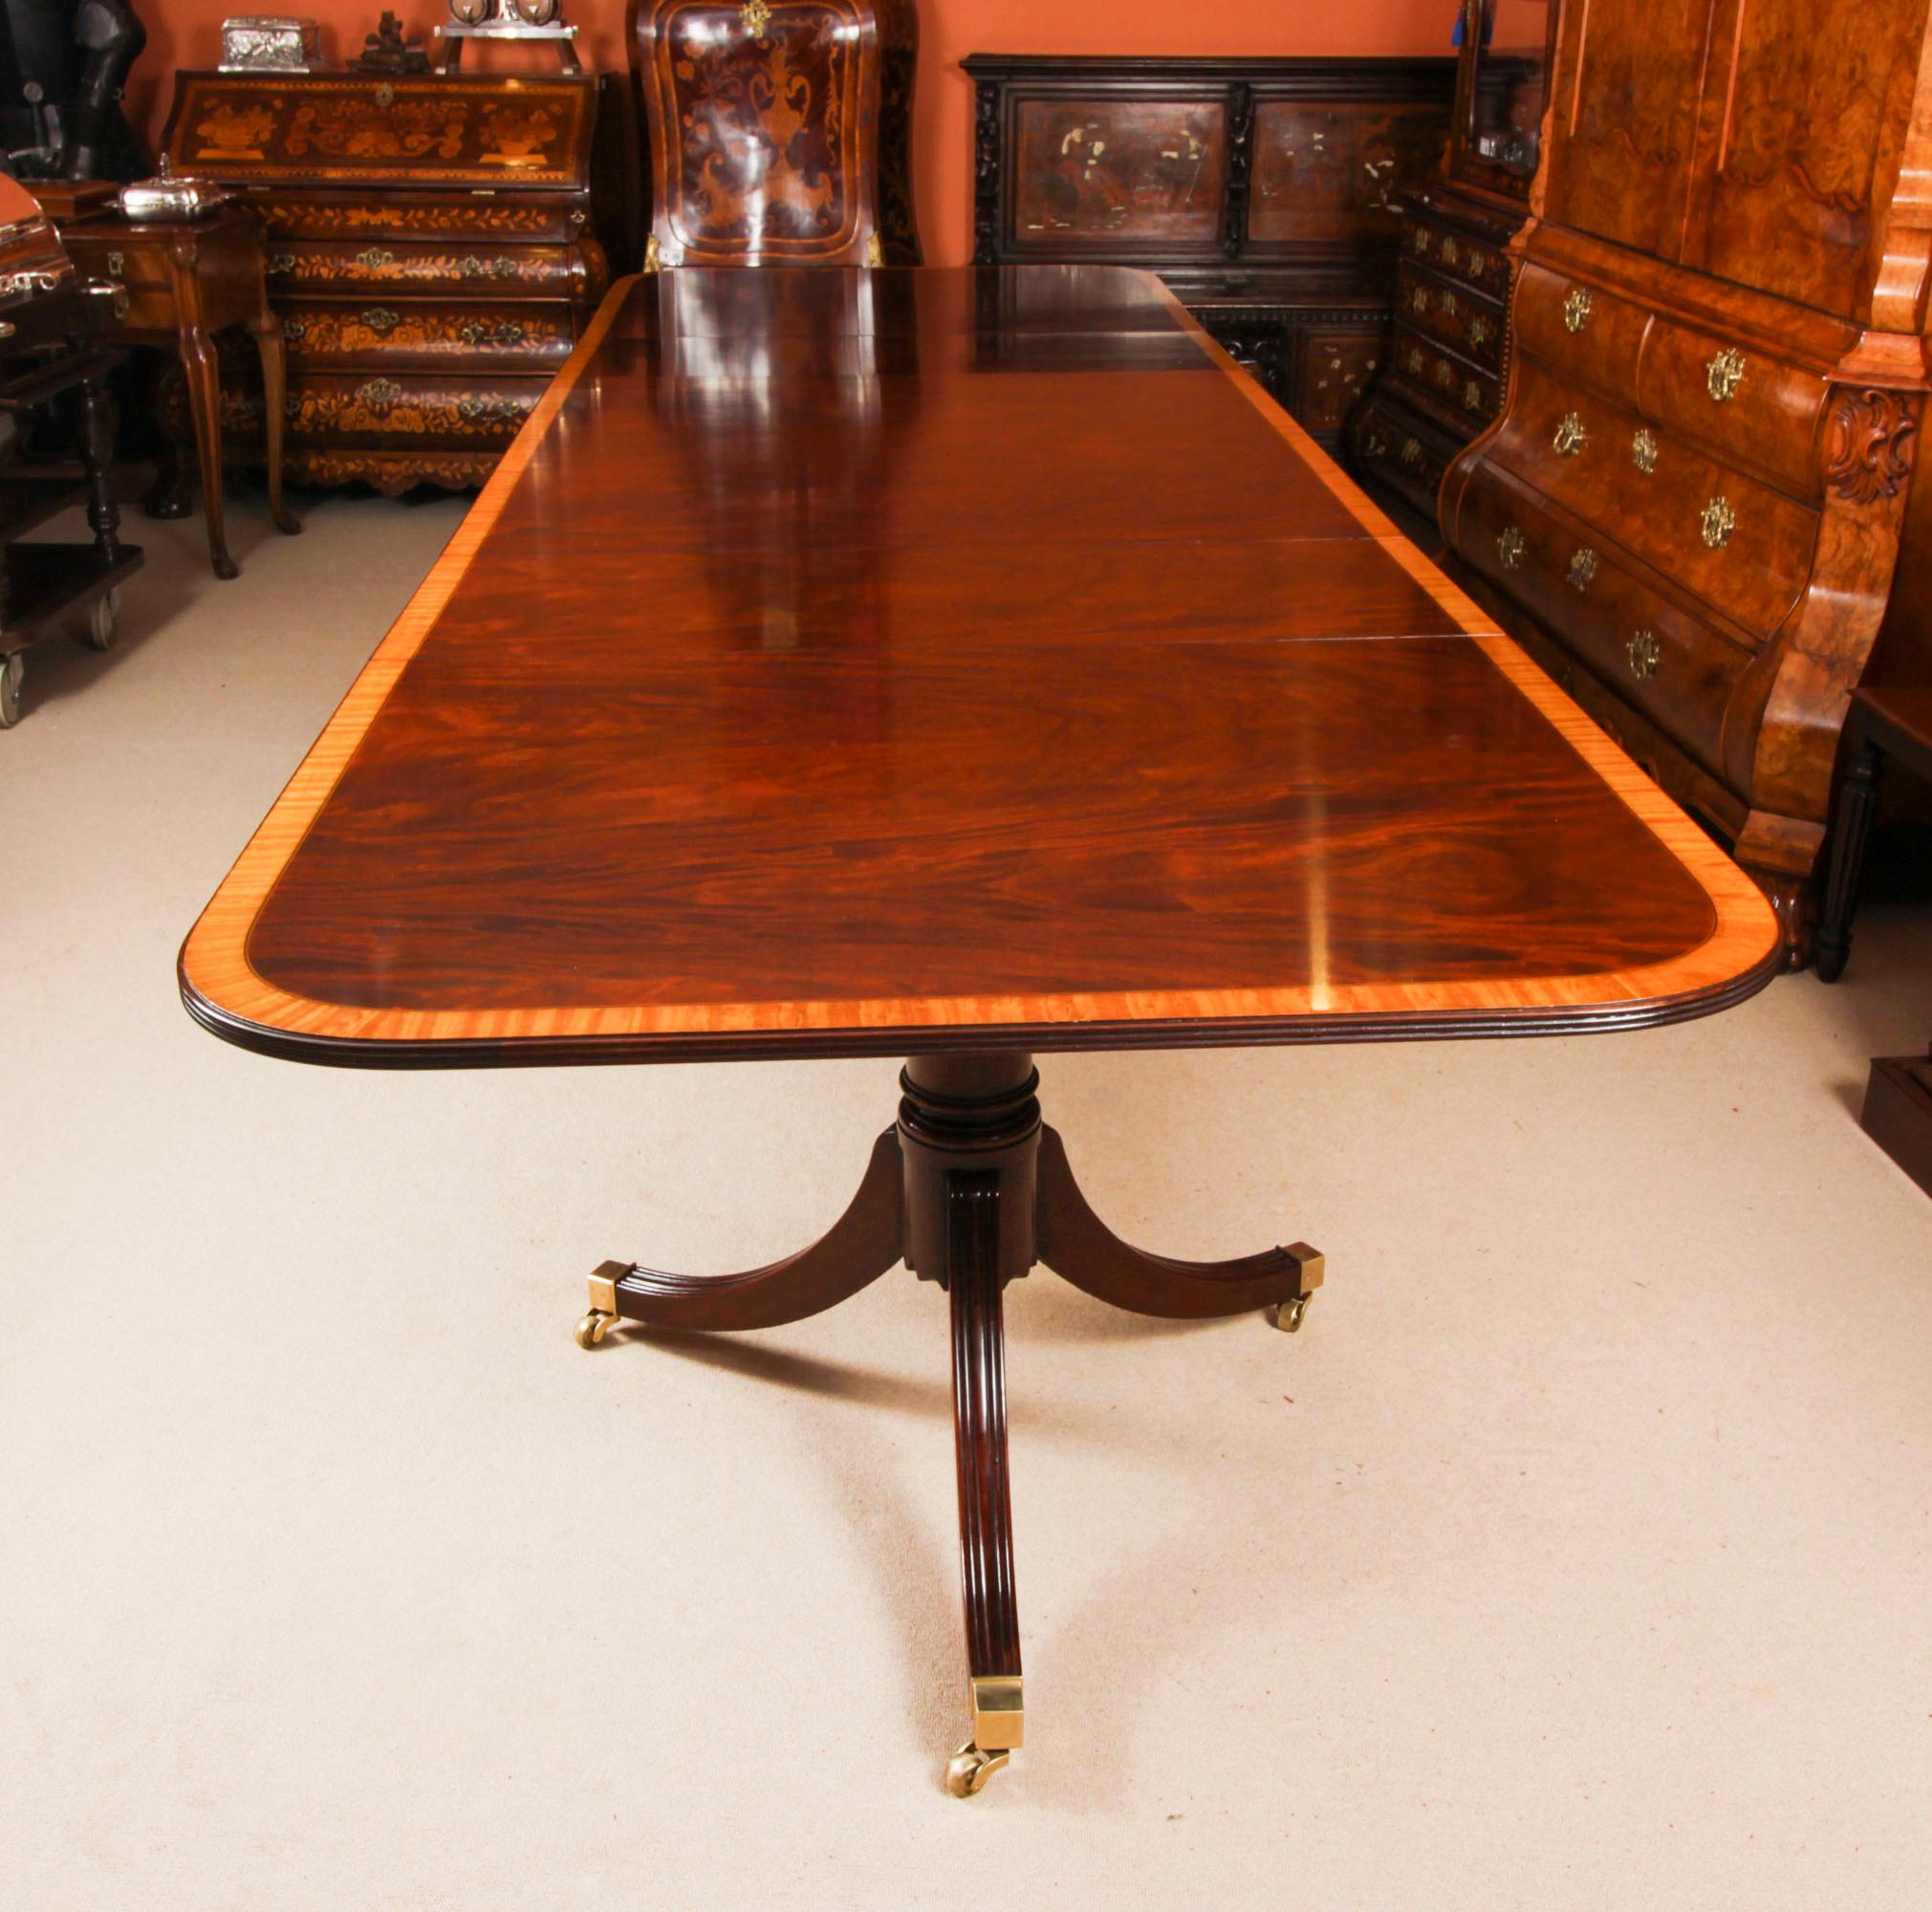 Mahogany Vintage 13ft Regency Revival Crossbanded Dining Table 20th Century For Sale